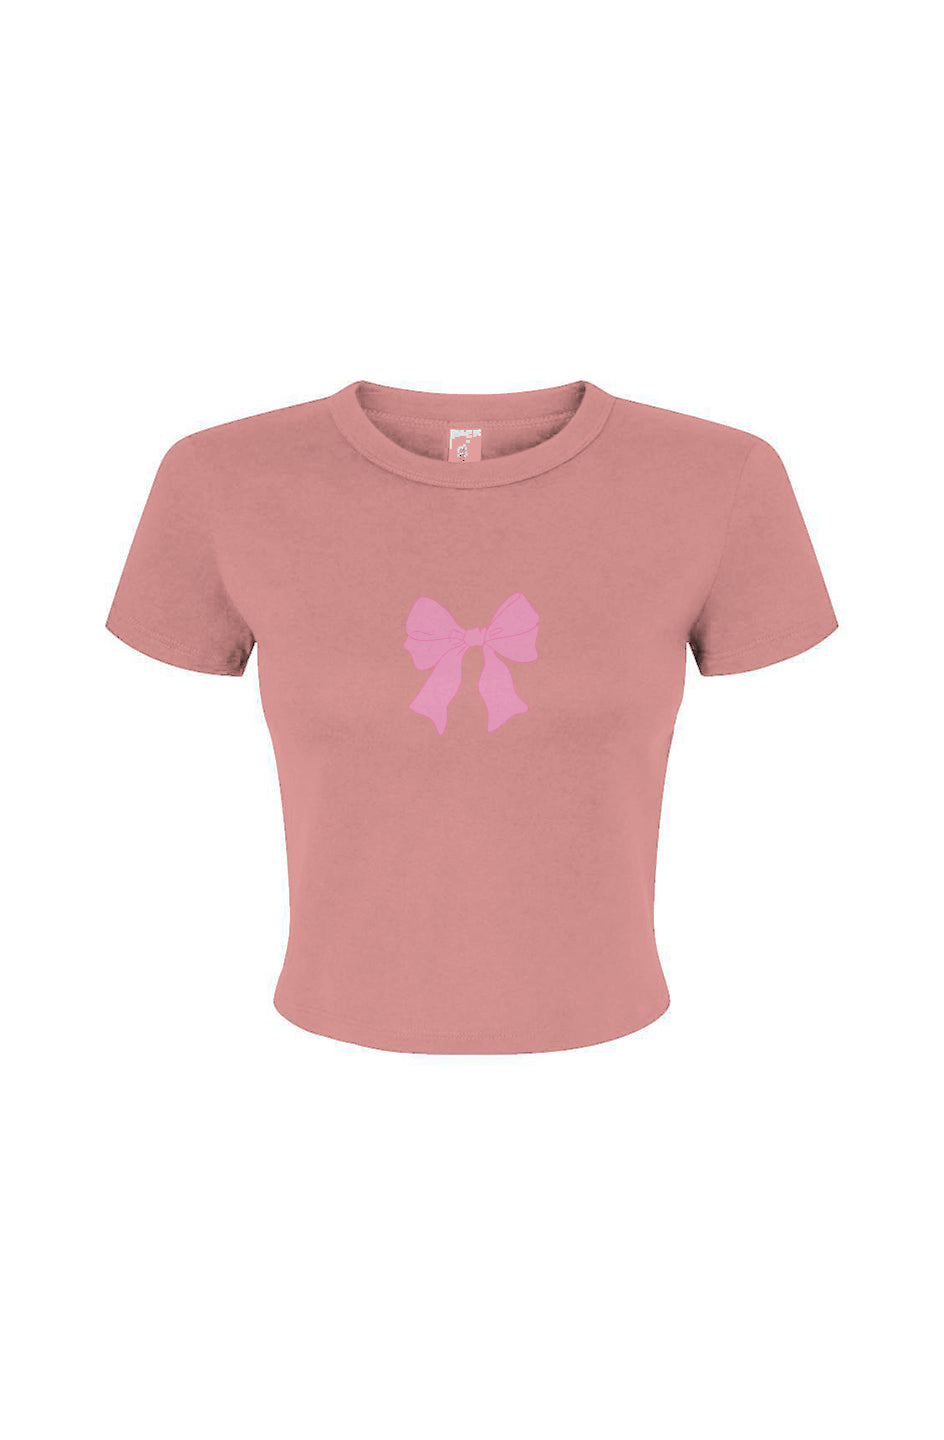 Bow Fitted Baby Tee